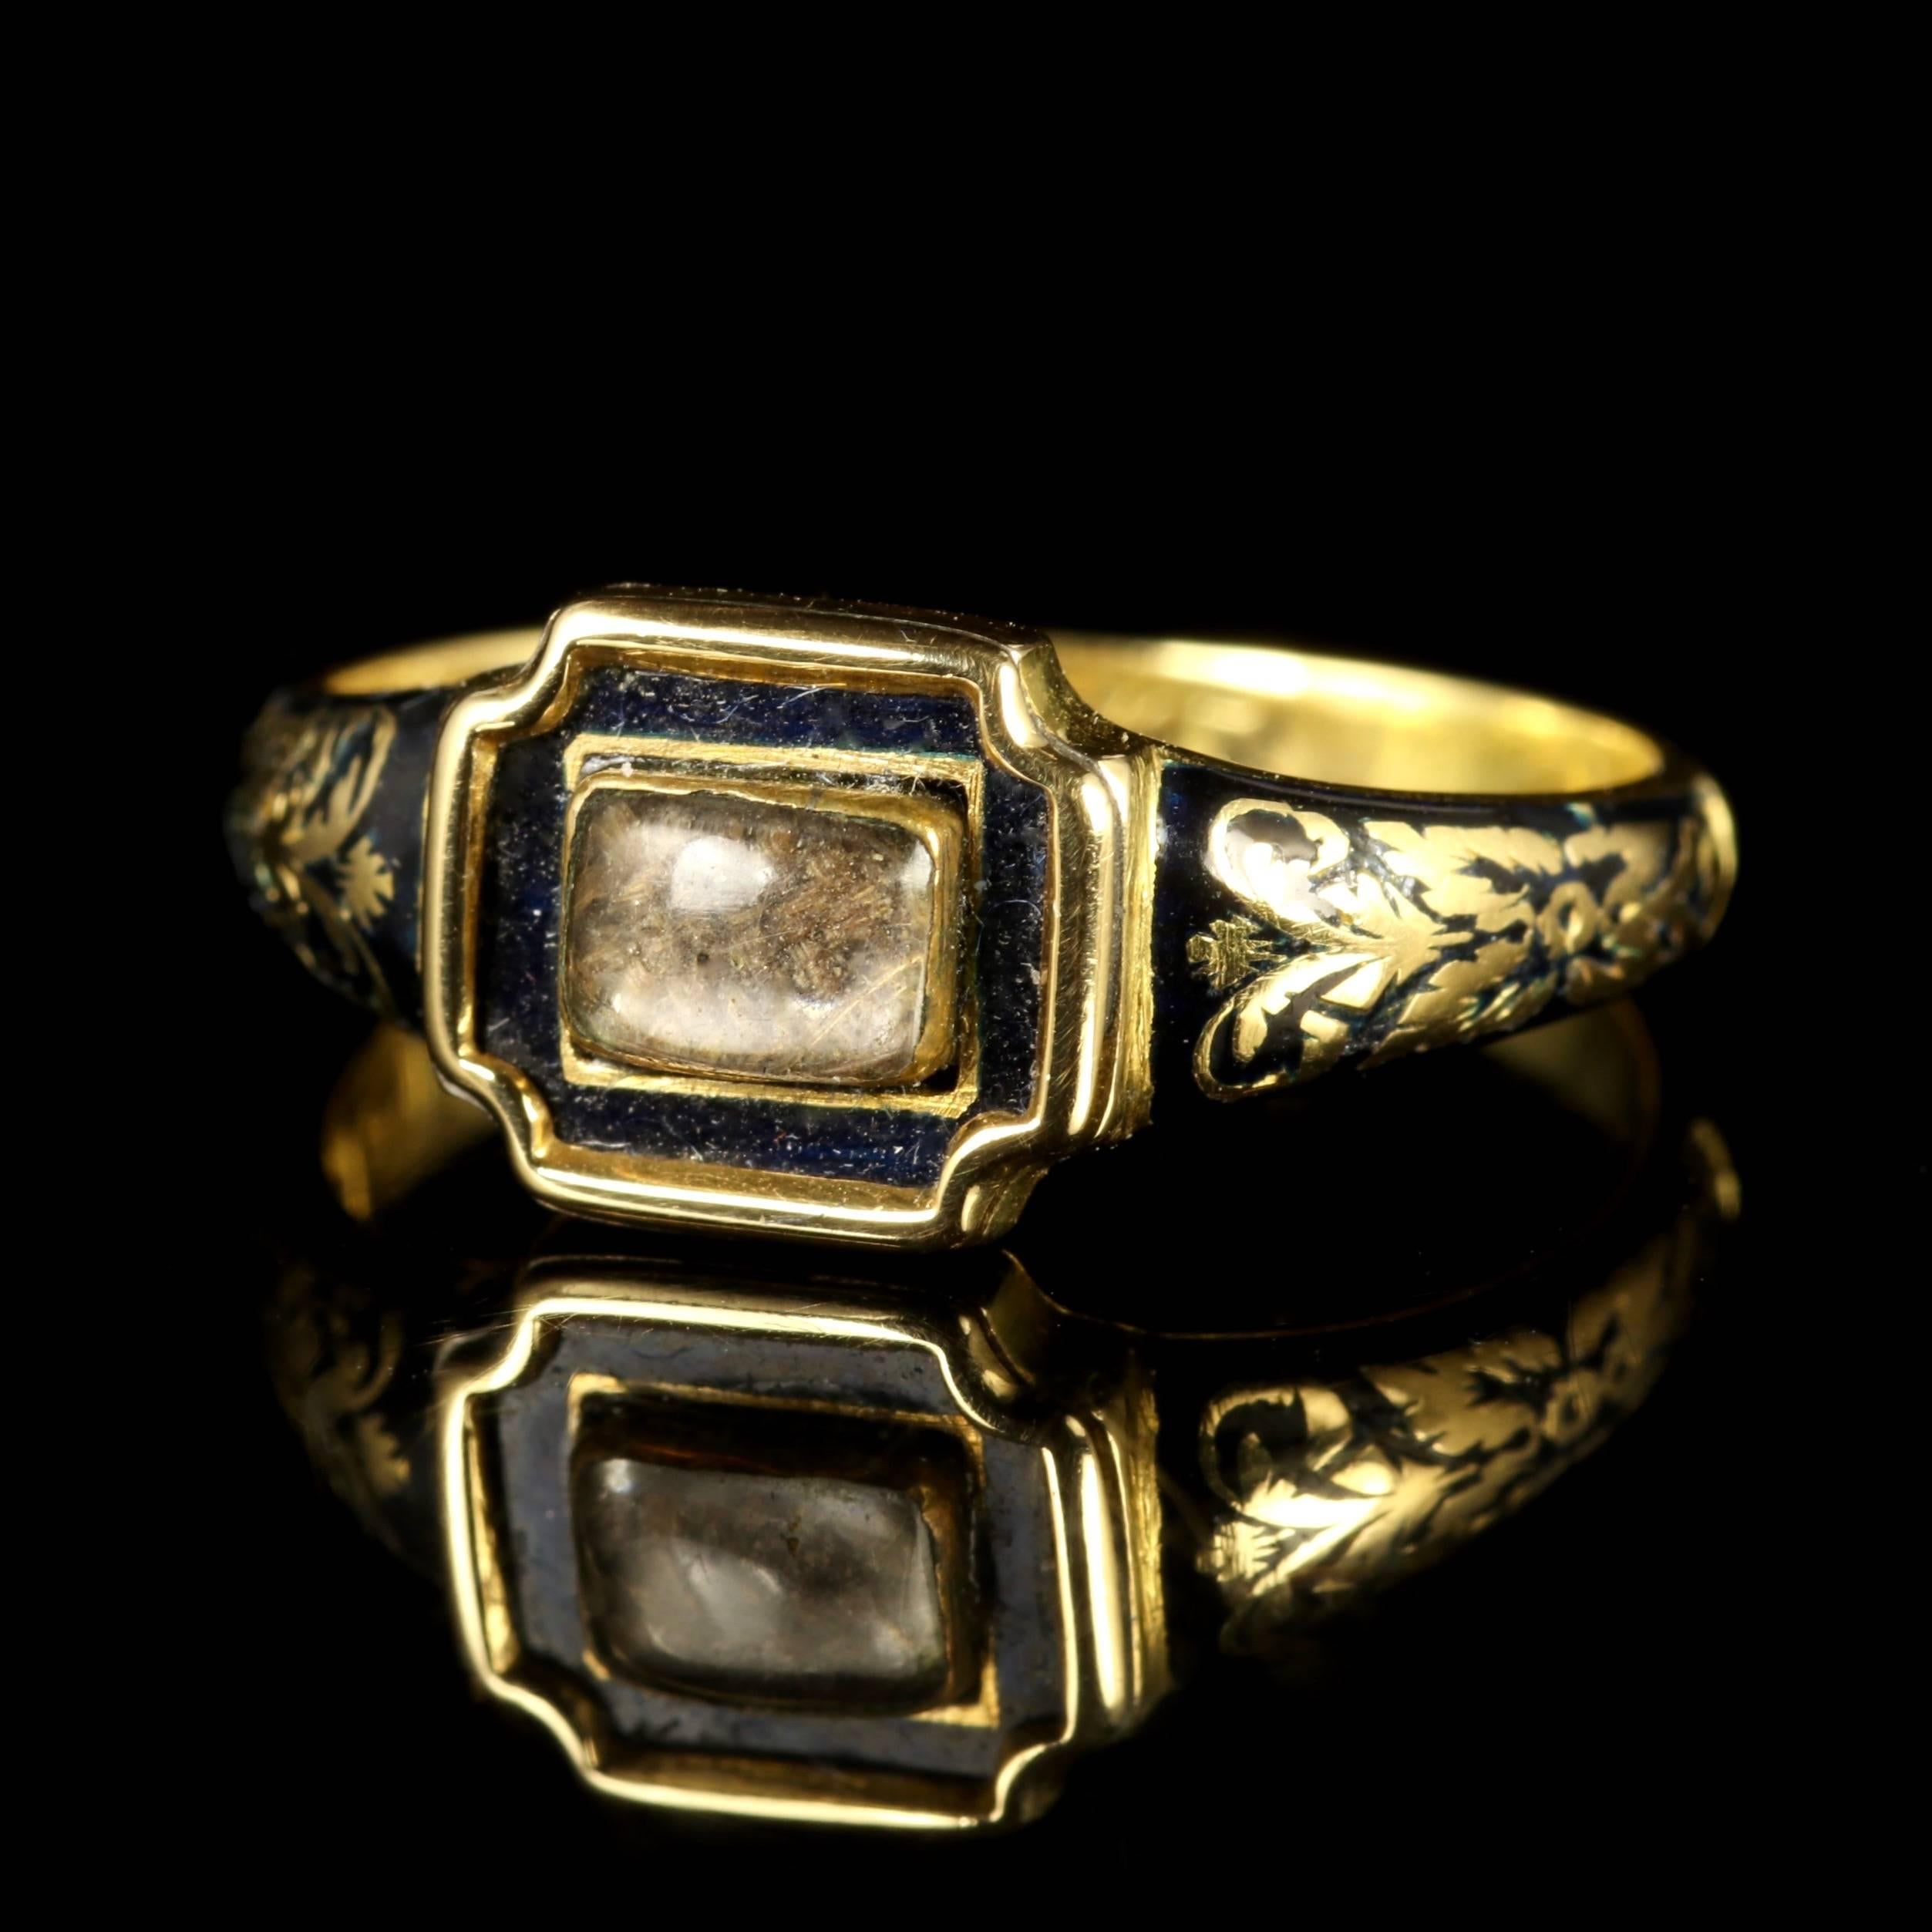 This fabulous Georgian mourning ring is set in 18ct Yellow Gold, Circa 1790.

Due to its age, Georgian jewellery is quite rare, with some pieces almost three hundred years old. From 1714 until 1837 four King Georges and a short-lived William gave